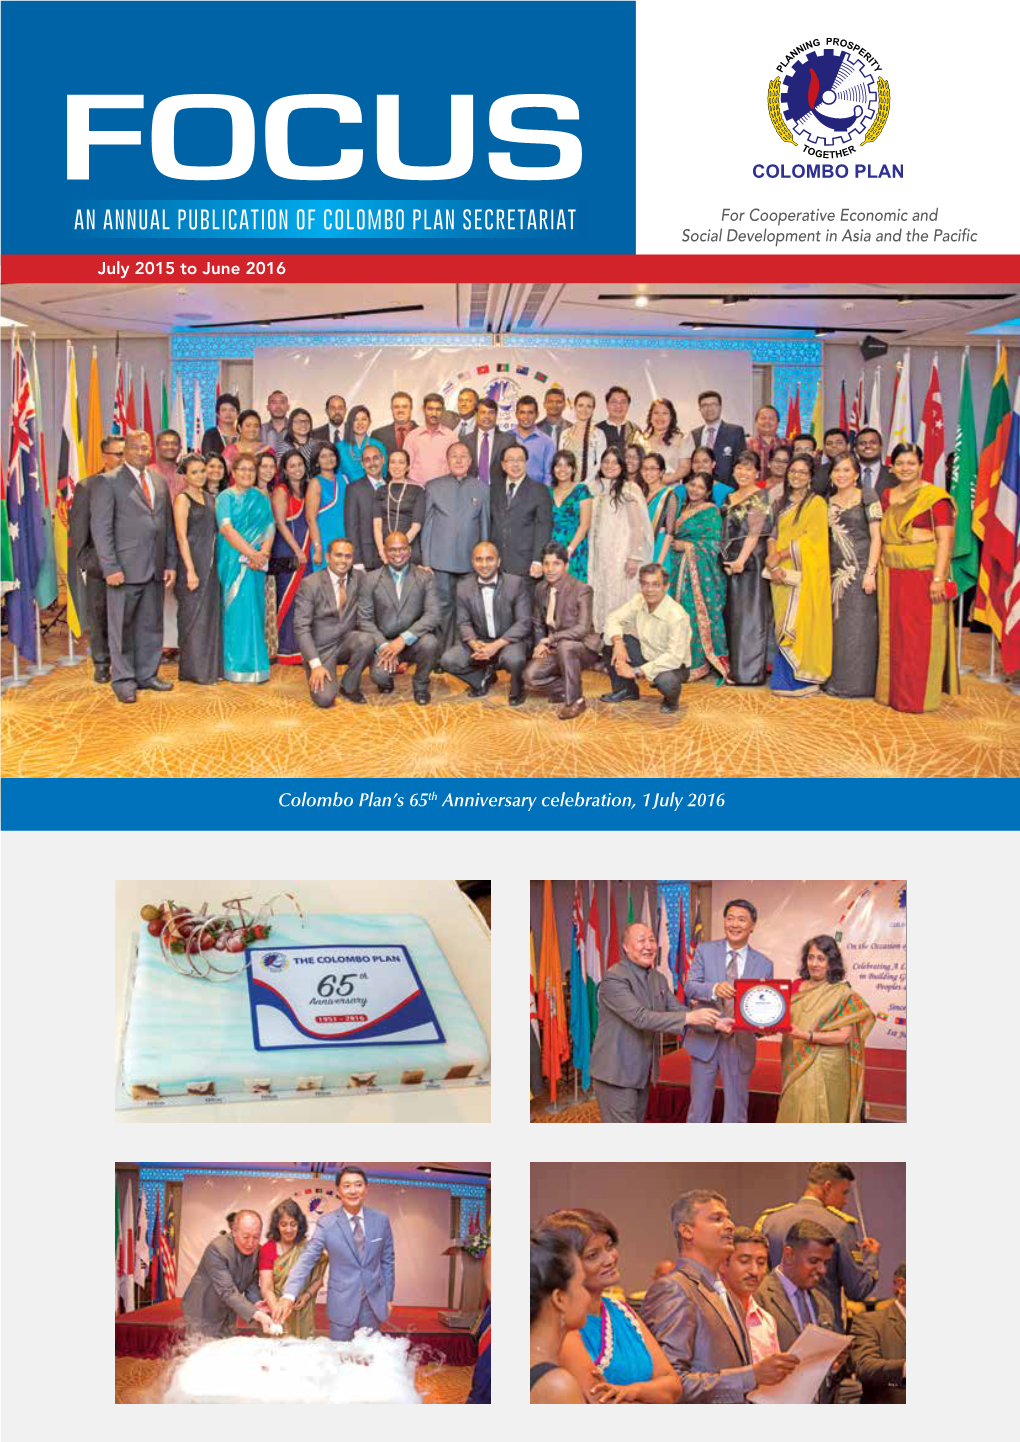 AN ANNUAL PUBLICATION of COLOMBO PLAN SECRETARIAT for Cooperative Economic and Social Development in Asia and the Pacific